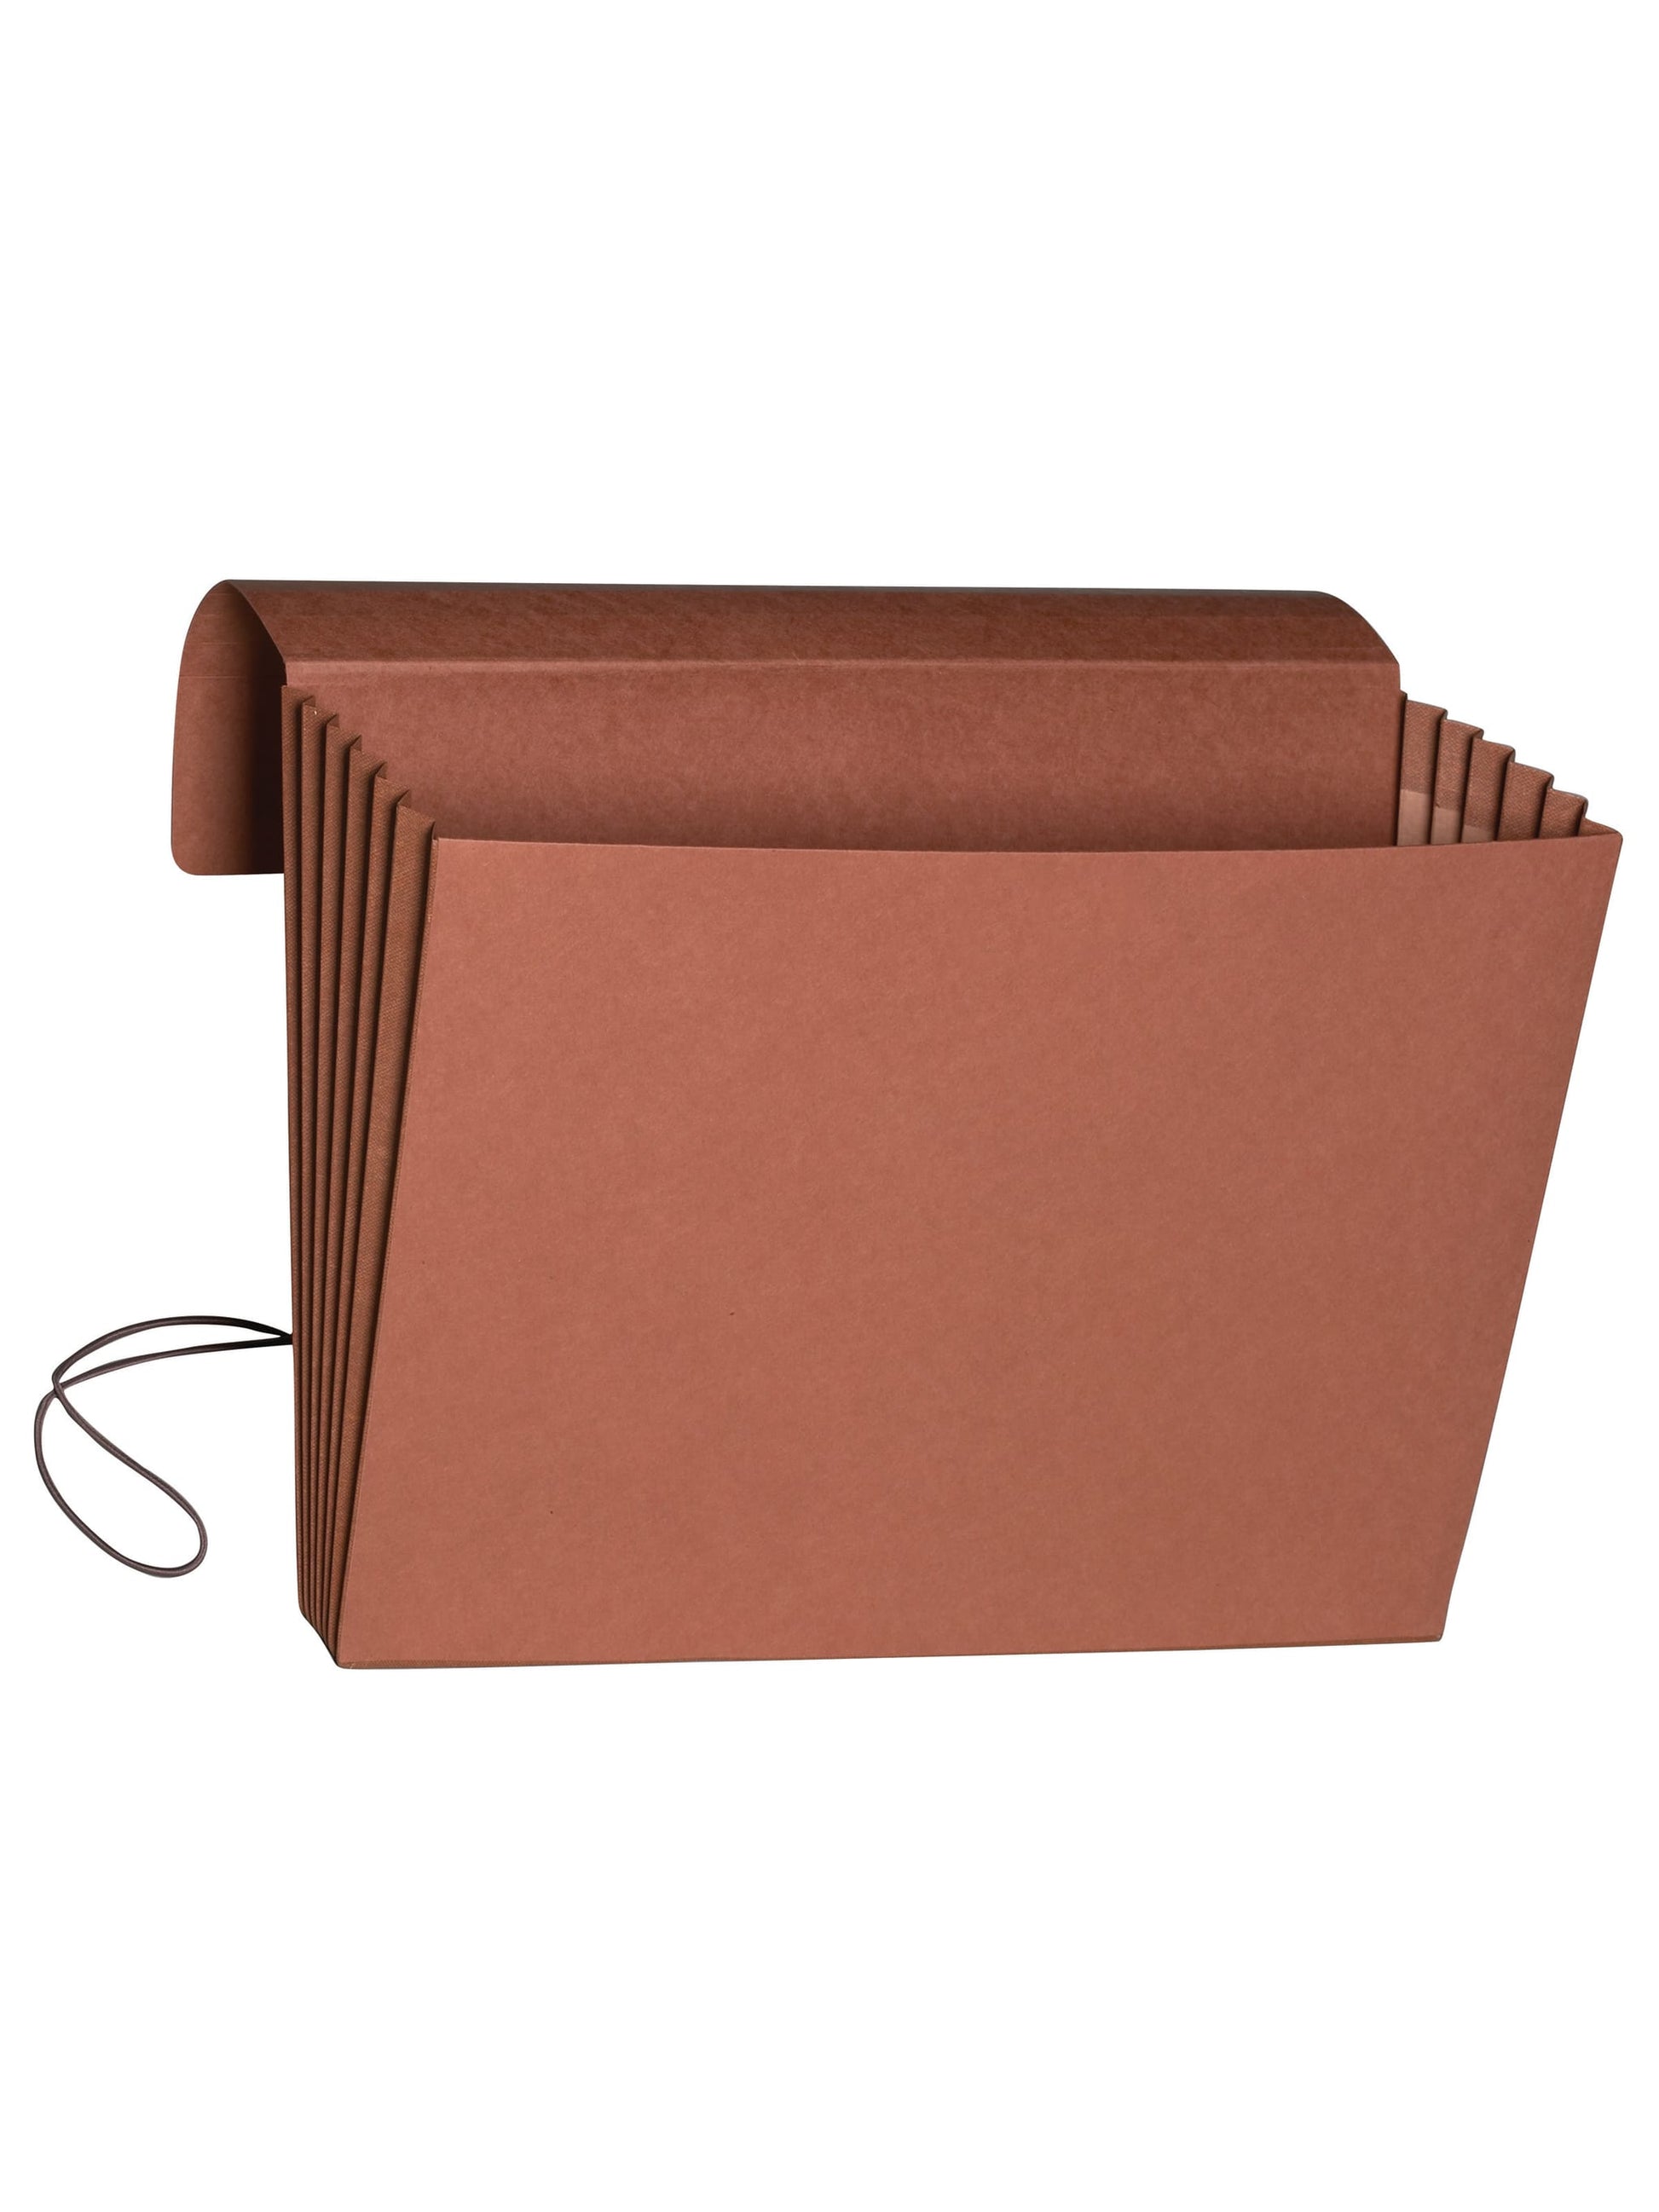 Extra Wide Expanding Wallets with Elastic Cord, 5-1/4 Inch Expansion